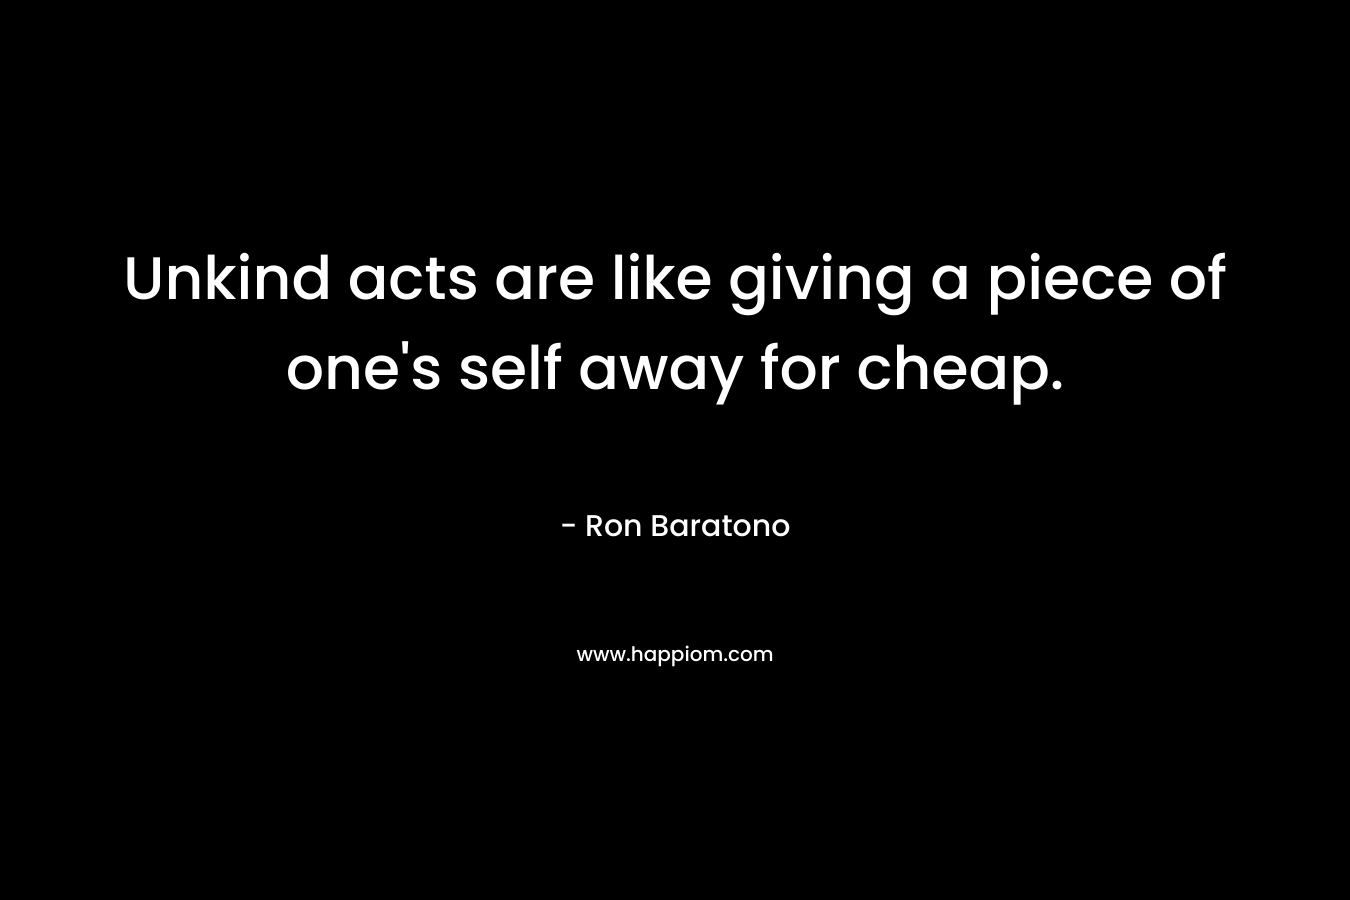 Unkind acts are like giving a piece of one’s self away for cheap. – Ron Baratono